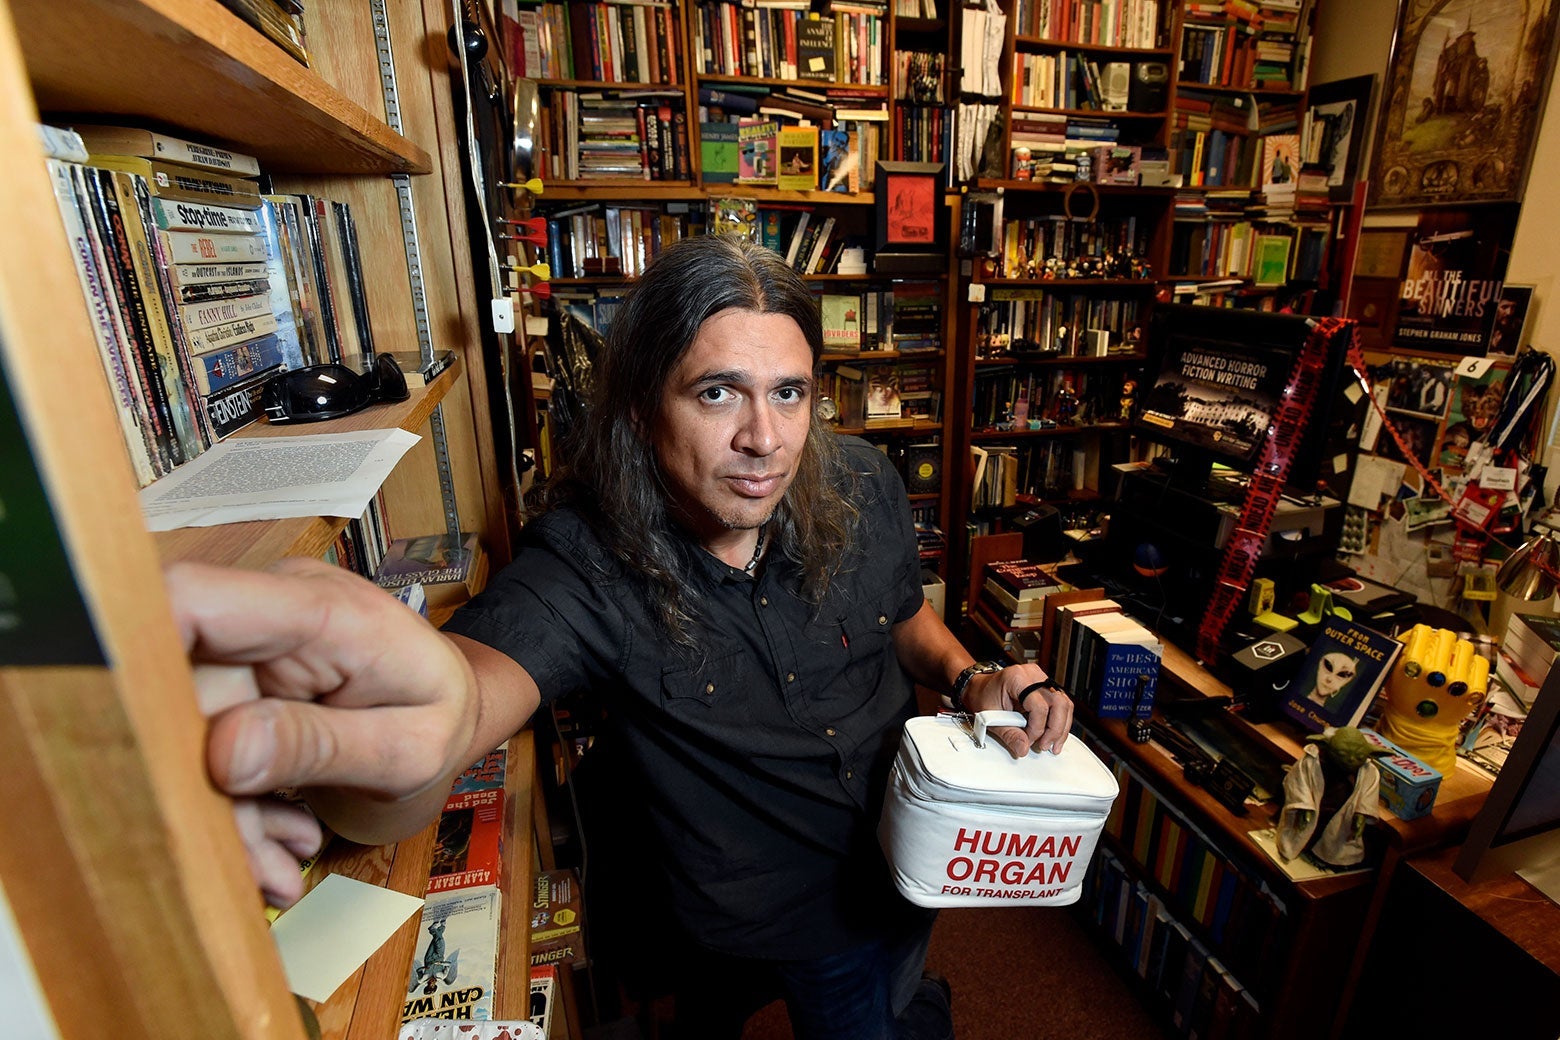 Stephen Graham Jones stands in a room full of books, carrying a box labeled "Human Organ."